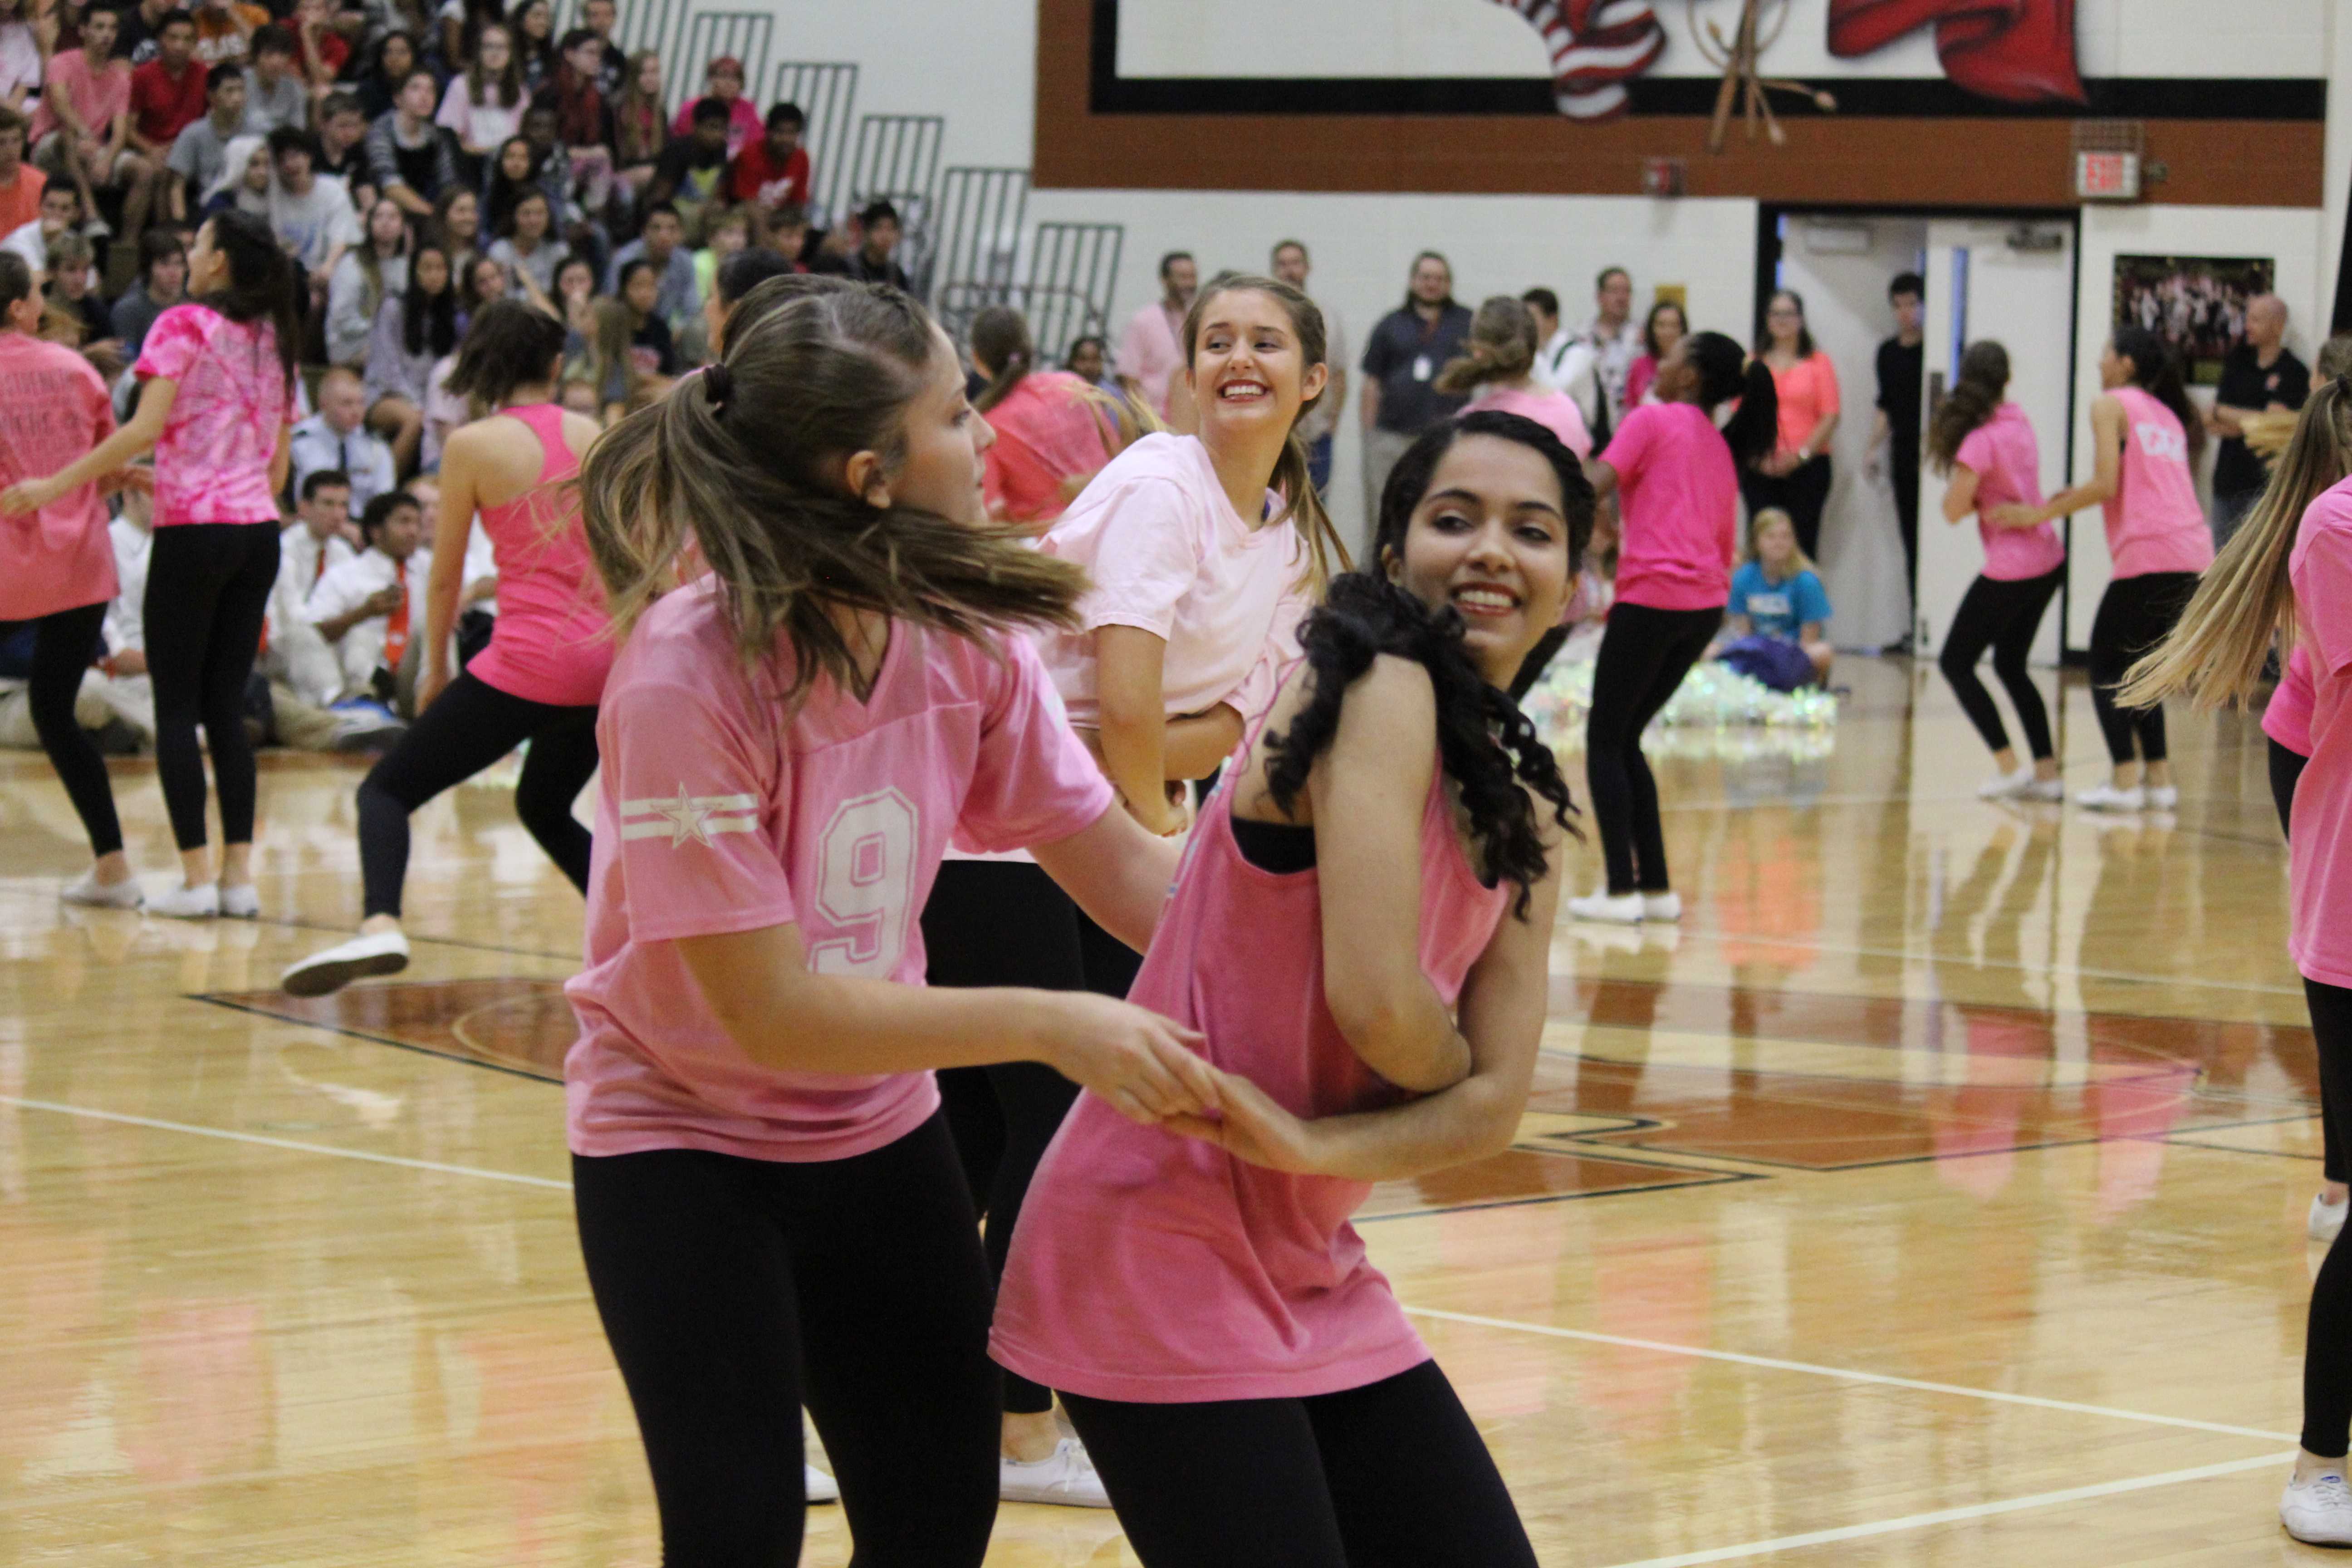 Students+Raise+Awareness+of+Breast+Cancer+During+Pep+Rally